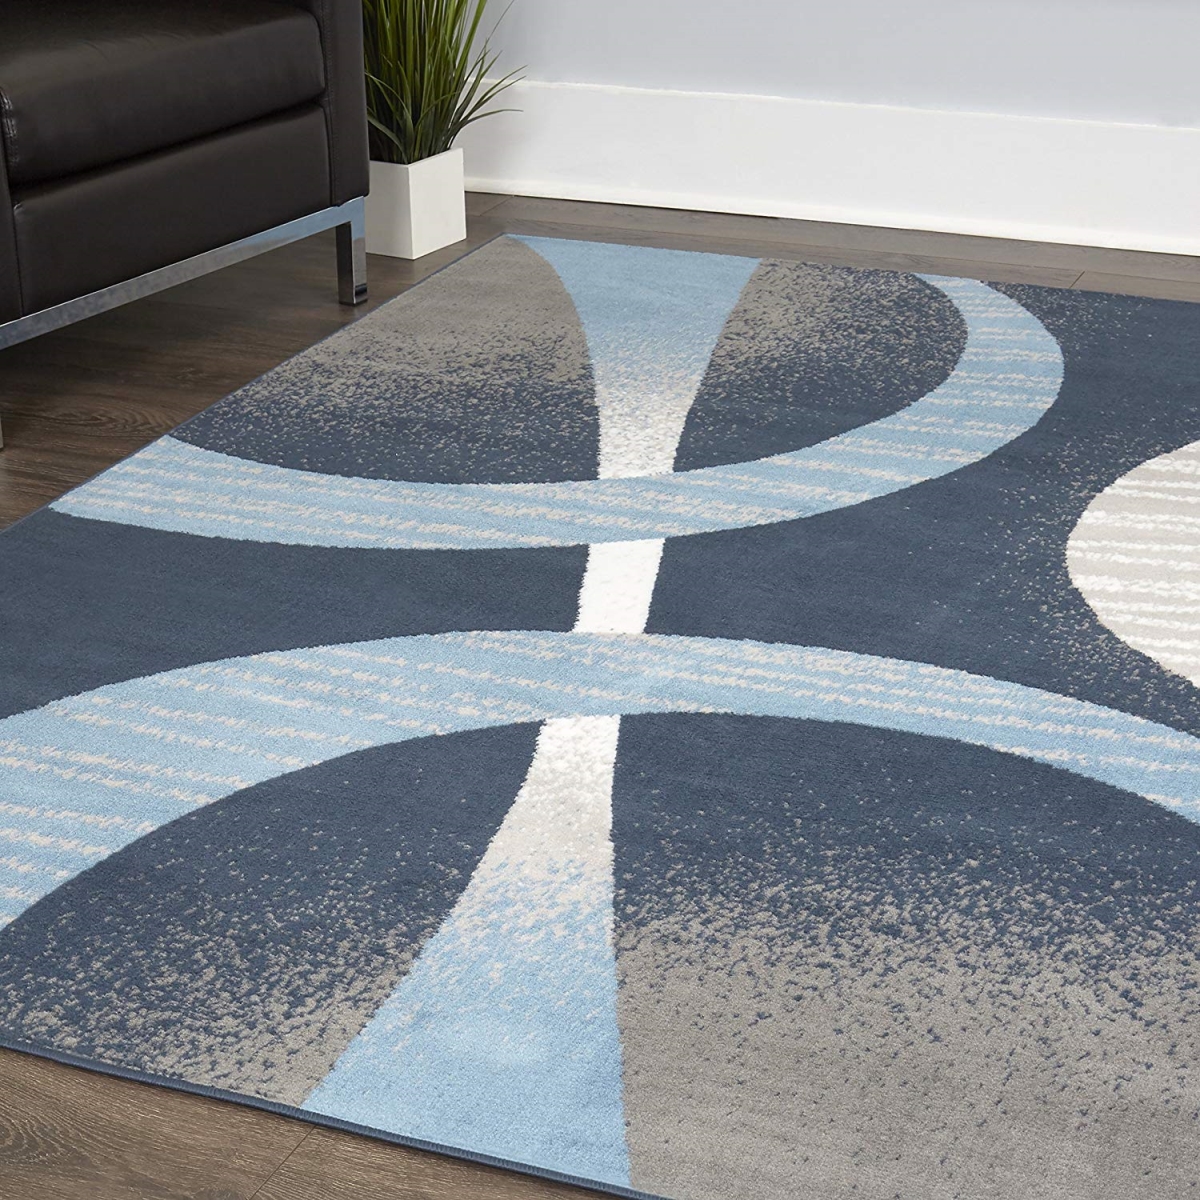 769924532454 1 Ft. 9 In. X 7 Ft. 2 In. Lyndhurst Melia Runner Area Abstract Rug - Midnight Blue & Blue